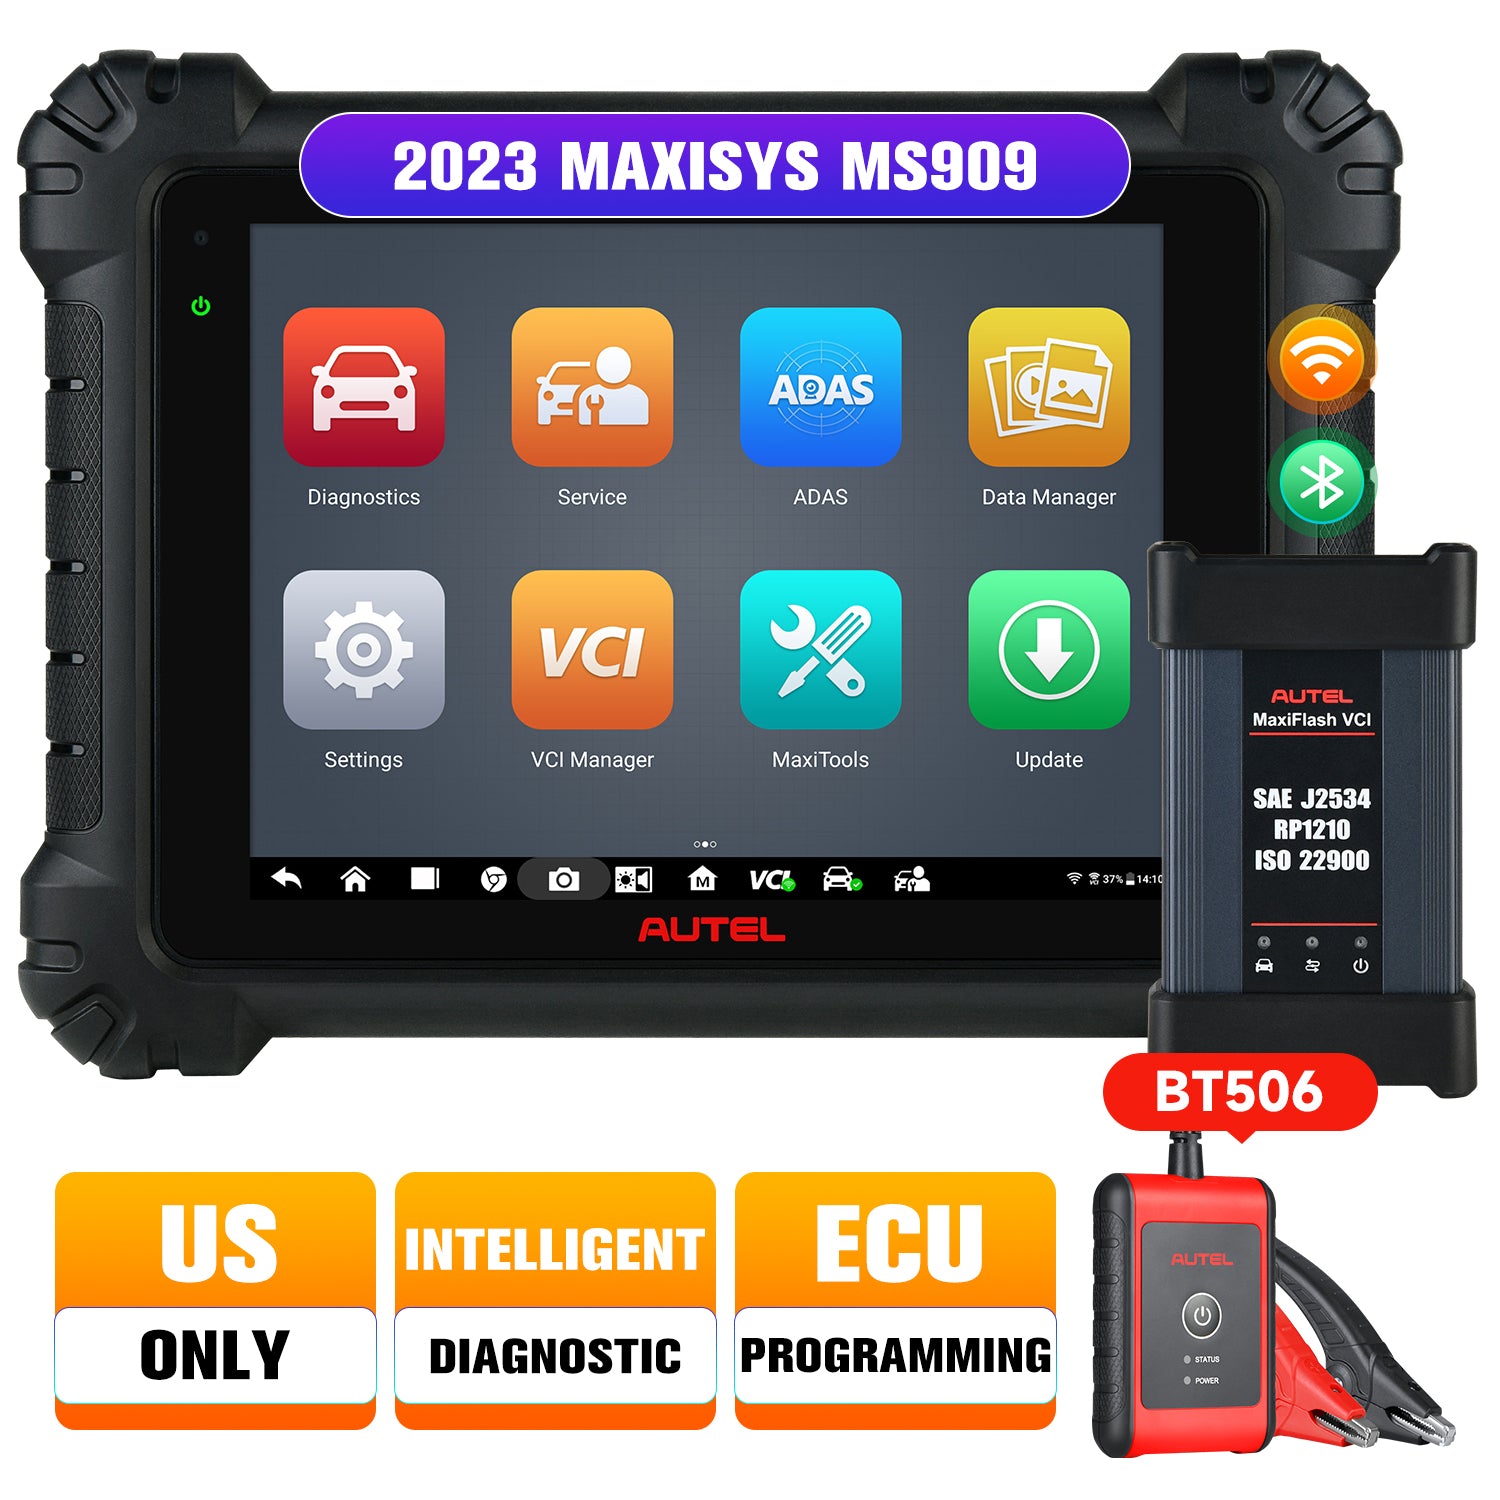 Autel Maxisys MS909 and BT506 ecu programming us only